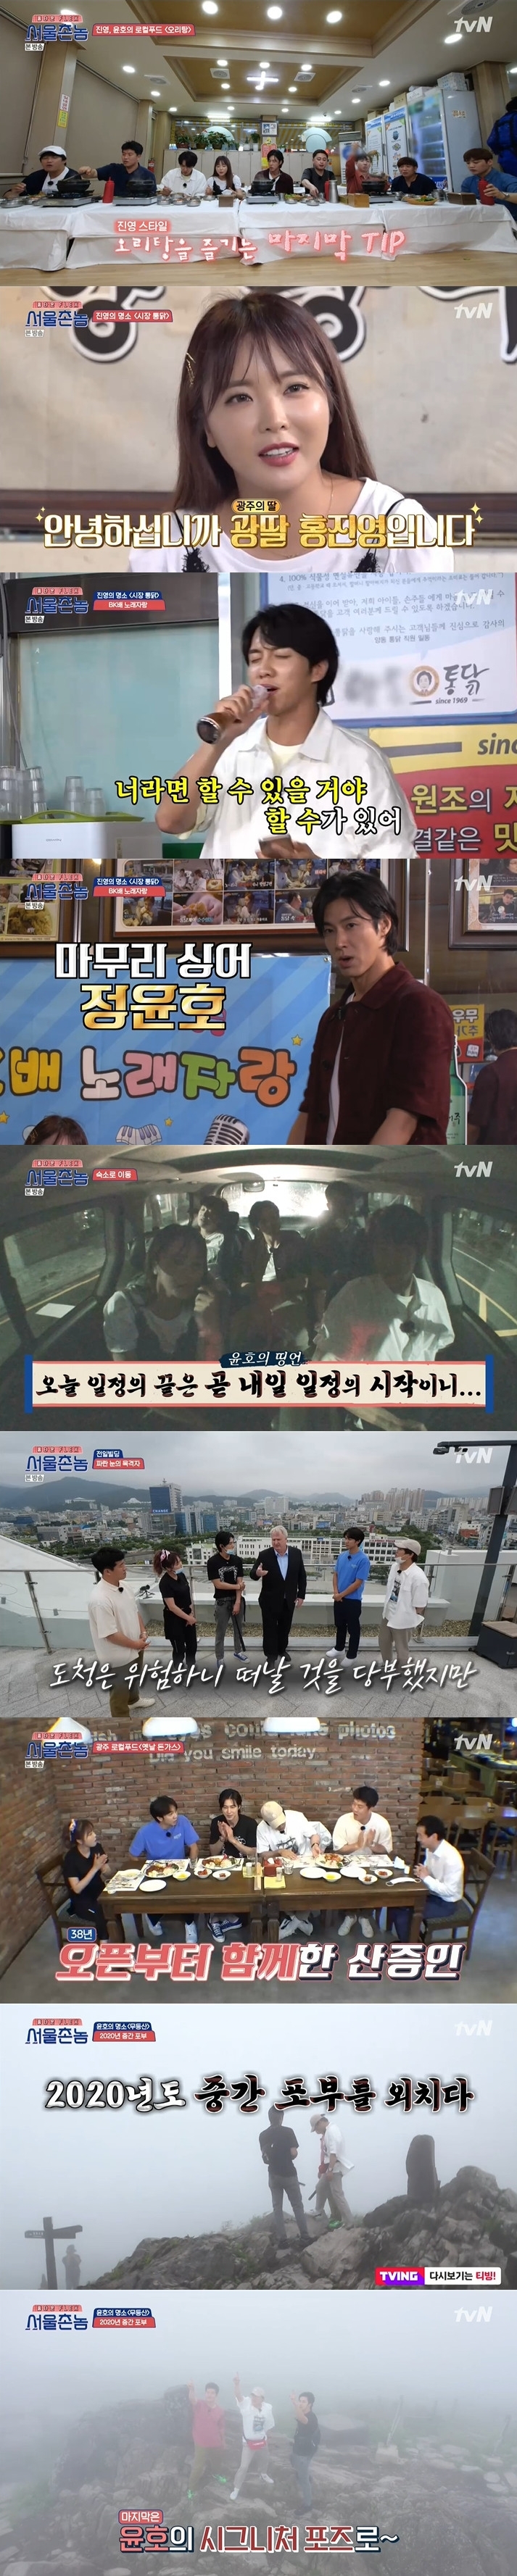 Seoul=) = Gwangju Local Kim Byung-hyun Yunho Hong Jin-young recalled memories by introducing their Gwangju attractions.TVN Hometown Flex , which was broadcasted at 10:50 pm on the 2nd, was decorated with the last story of Gwangju, and Kim Byung-hyun Yunho Hong Jin-young appeared.On this day, Hometown Flex and Gwangju locals went to eat Hong Jin-young and Yunhos local food, Oritang.Lee Seung-gi also praised it as a taste I have not eaten in Seoul and a medicine, a recreational dish.We have to recover now to make the next schedule, Yunho added, adding that he headed straight to the market chicken house.The Hong Jin-youngs life record was also released in surprise.I went to study abroad for a while at elementary school and I was confident in English when I was in Middle School, he said.I dreamed of an entertainer from the third time and made a ponting for studying standard language, he said. I went to a coin karaoke room every day and practiced.People who sing well at our time sang the song Truth and Technique by Kim Hyun-jung, and mastered the song. Yunho said of HiteJinro during his middle school, I also wanted my parents to be a prosecutor. I will take everyone in Korea.I had a dream of spreading a legitimate society. BK ship song pride followed at the chicken house.In the first round, Hong Jin-young won 84 points with the atmosphere of Amor Party while Kim Byung-hyun was on the night.Lee Seung-gi selected Kangsans You Can Do and showed his singing ability, but he got 60 points and got the night.Cha Tae-hyun then opened up the resurrection Lonely Night and earned a high score of 91.Yunho, who confronted him, sang his song Order, but lamented when he got 85 points.Yunho finished Haru and said, It is still starting tomorrow, he said on his way back to his hostel. Lets look back on Haru today.The next day, Yunho said, Time is too short. This should be two nights and three days, not one night and two days. If you are sorry, lets catch more Haru.Lee Seung-gi said, Jeong Yunho said from the morning, Lets go more meaningful today.After breakfast at a local restaurant, he moved to the old town of Gwangju; five people went to the former building, which kept the history of the 1980 Gwangju democratization movement.In particular, Professor Injohan appeared on behalf of the Gwangju locals who did not actually experience 5.18 at this place, I visited Gwangju on May 25, 1980.Friends had come back from medical school because they had a bad thing. They came back on the national highway and went through seven places.I told him that I was a US Embassy employee at the time and that I had to go to Gwangju to see if there were missionaries. Kim Byung-hyun said, It was not easy to get the word 5.18 out of Gwangju, and Yunho also said, The movie came out and started to talk easily to the public.When we were young, we came to visit. It was no longer a strange story, but we came in for granted. After visiting Gwangjus famous bakery and recalling memories, Kim Byung-hyun and Yunho Hong Jin-young went to the famous Dongas restaurant in Chungjang-ro, where they spoke together.Later, he headed to Mudeungsan, a famous spot for Gwangju and a memorable spot for Jeong Yunho.It takes a little less than two hours to get to the middle salary, Yunho said. I like the four people now.Lee Seung-gi Hong Jin-young succeeded in leaving the mission to beat Yunho with the right to waive mountain climbing.Yunho said, I am very happy to go to the mountains with my brothers, I will guide you well, but the fog was so bad.I tried to end it by shouting aspirations in 2020, he said.Kim Byung-hyun said, Let me do well when I am performing. Cha Tae-hyun also said, I am shooting fun, so many people will have fun. Yunho said, I will work in various ways.Especially, I am next to Jeolla-do, he added, revealing the aspect of passion mansour.In addition, B.O.K Friends, who reunited with Yunho after a long time through Hometown Flex , said, Jeong Yunho is always a special friend to me before and now, and I was worried that it might be for Jeong Yunho.Fortunately, I feel the same feeling, so I have a thought.  I am in the tenth moment when I was born or the happiest.  It was a big gift. Meanwhile, Hometown Flex  is broadcast every Sunday at 10:50 pm.